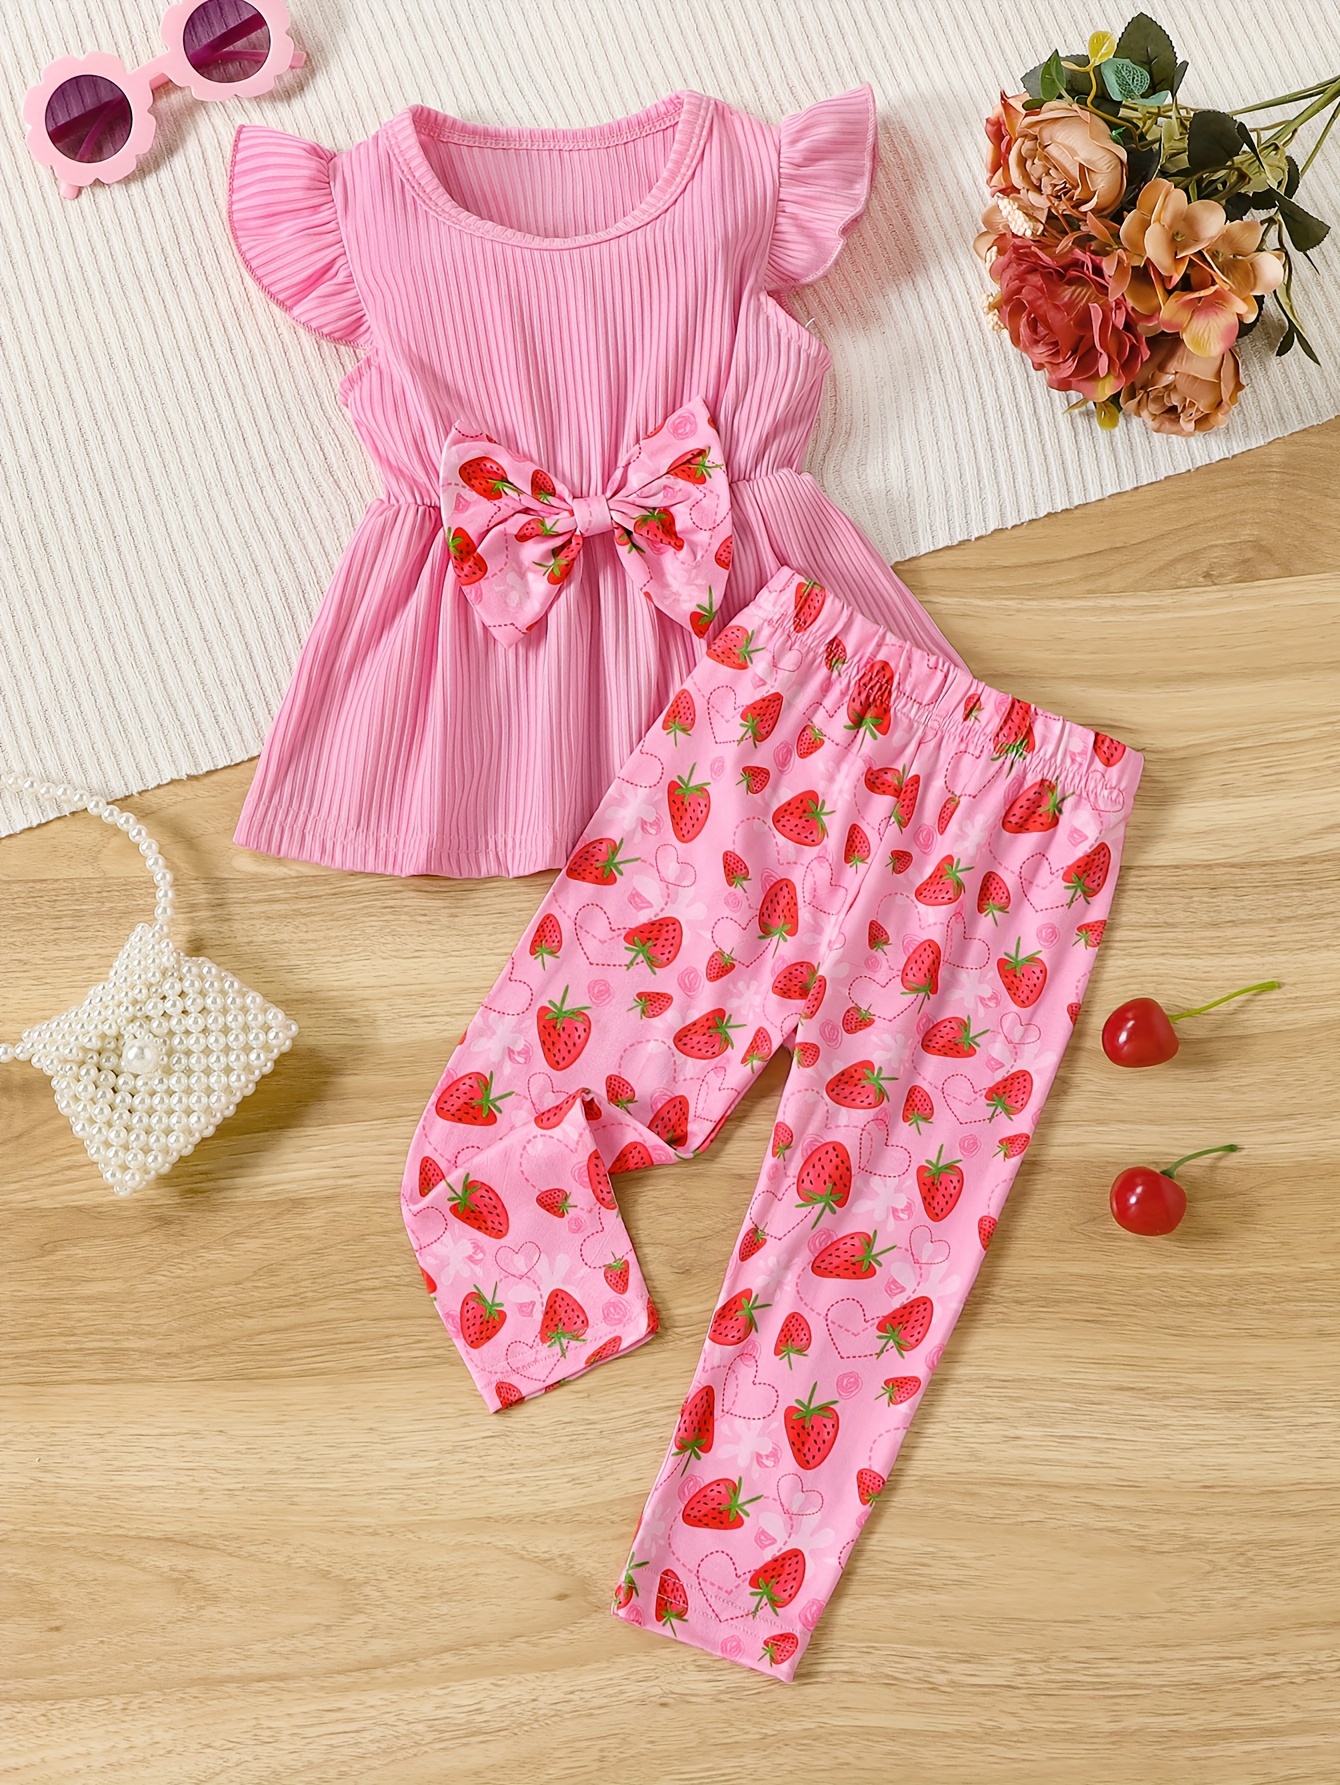 Imcute Toddler Baby Girl Clothes Ruffle Tops Bell Bottom Flare Pants Outfits  